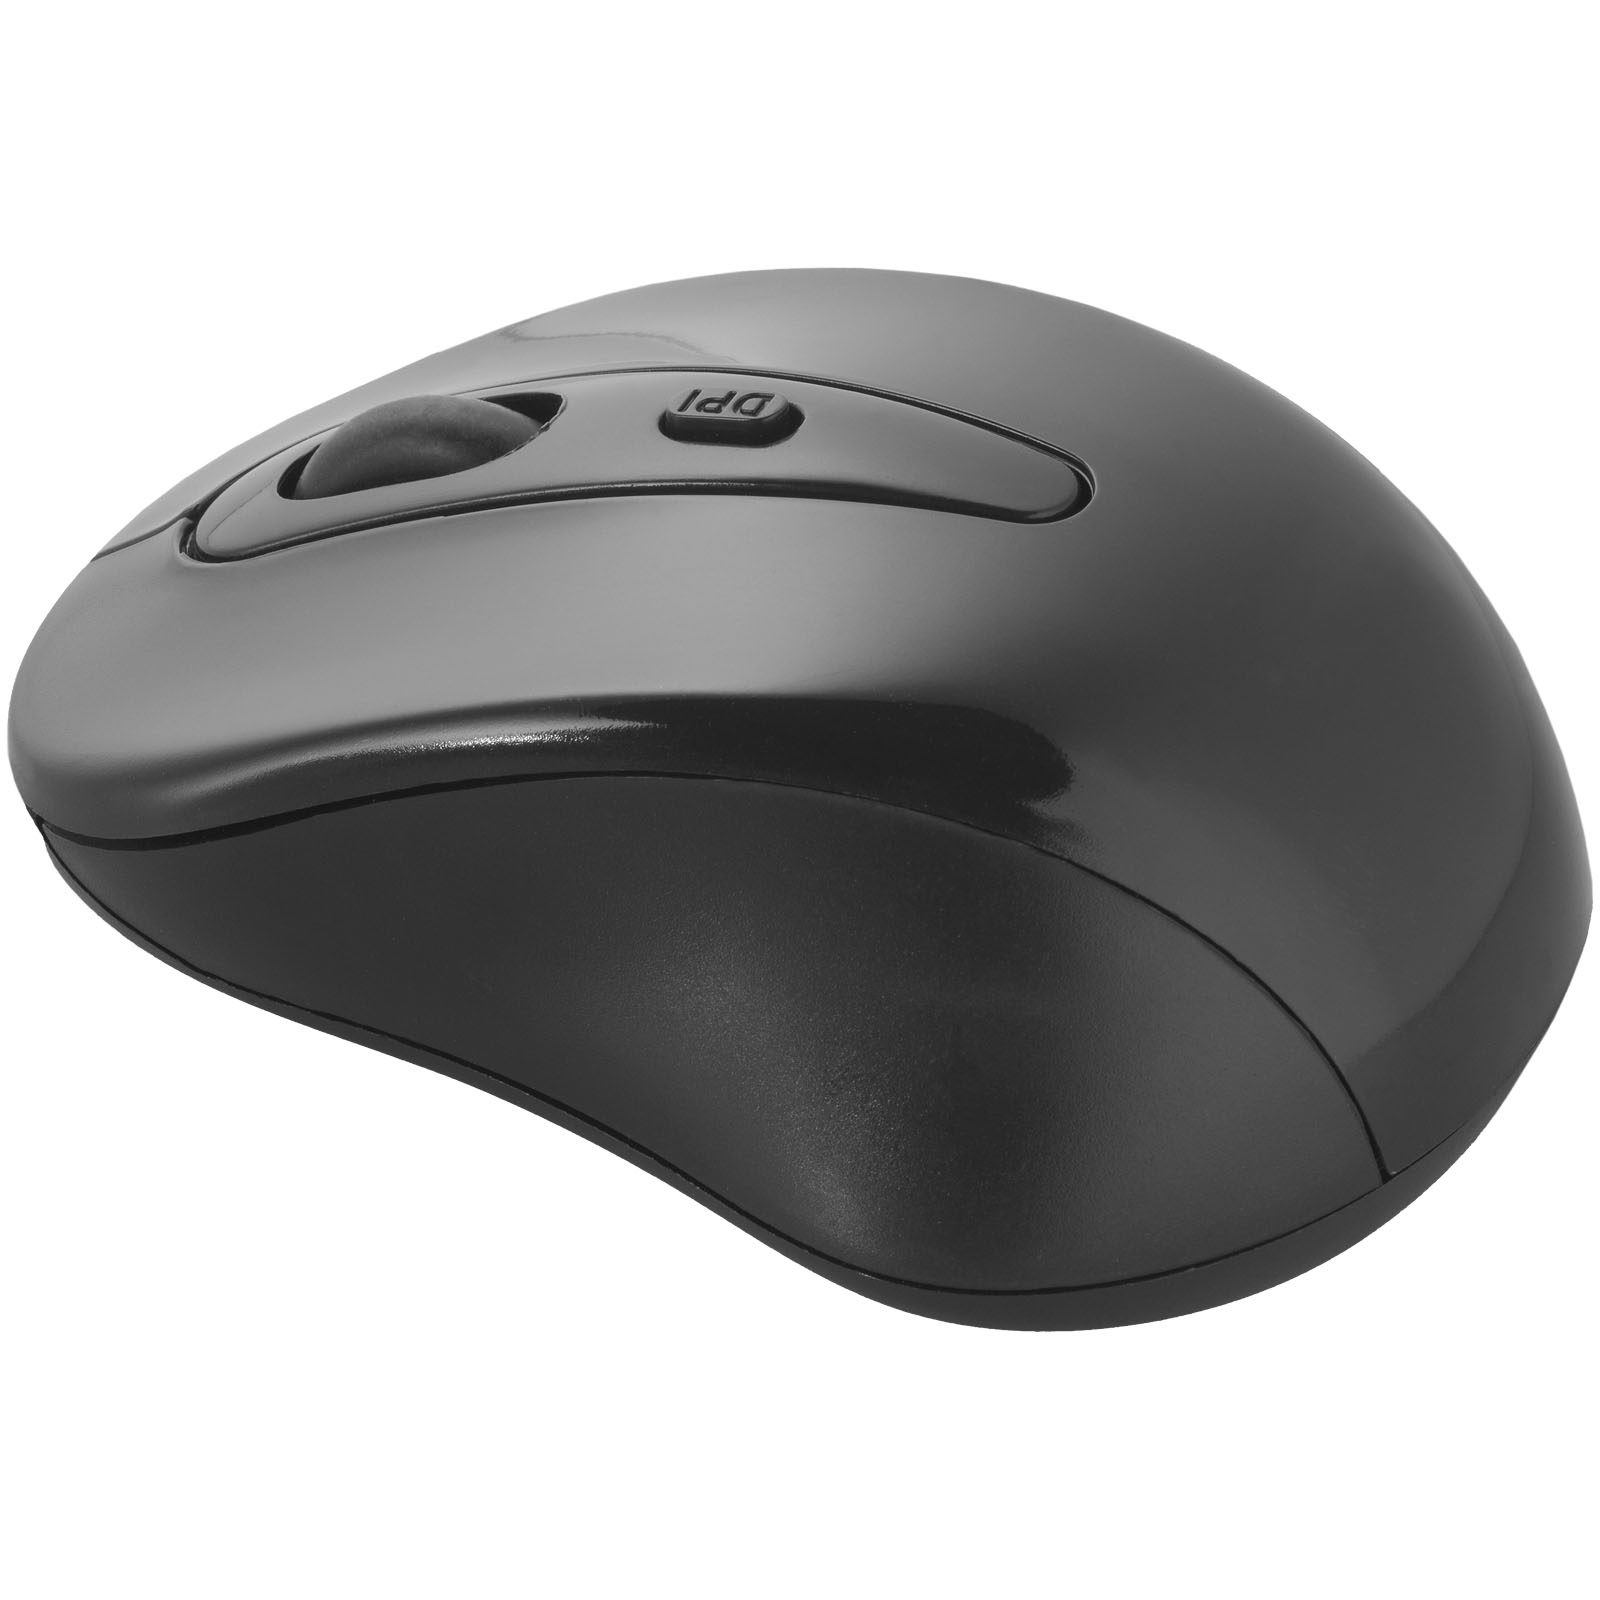 Advertising Computer Accessories - Stanford wireless mouse - 0